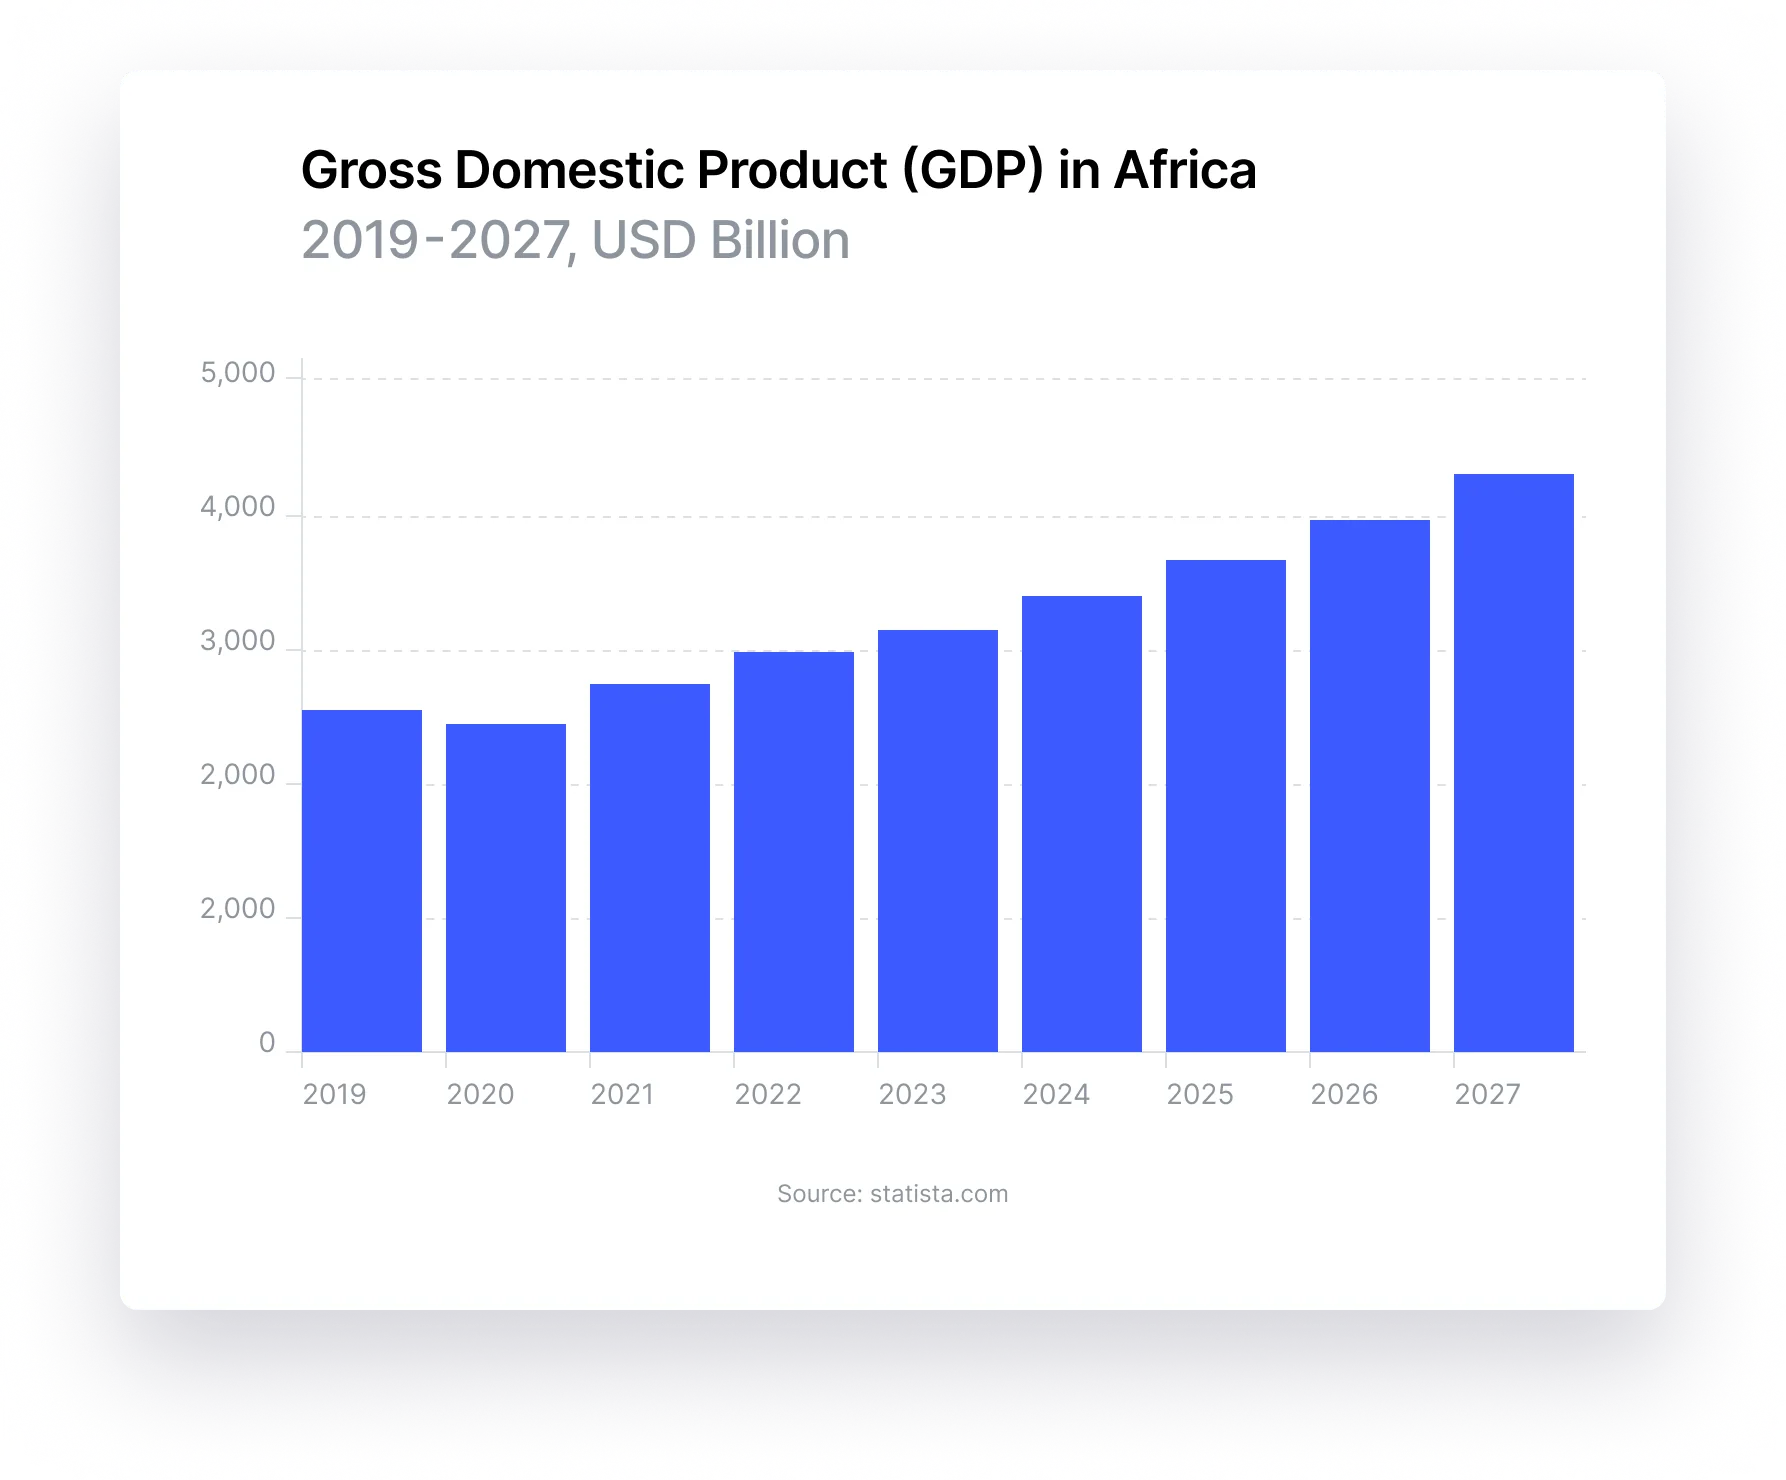 Gross Domestic Product in Africa